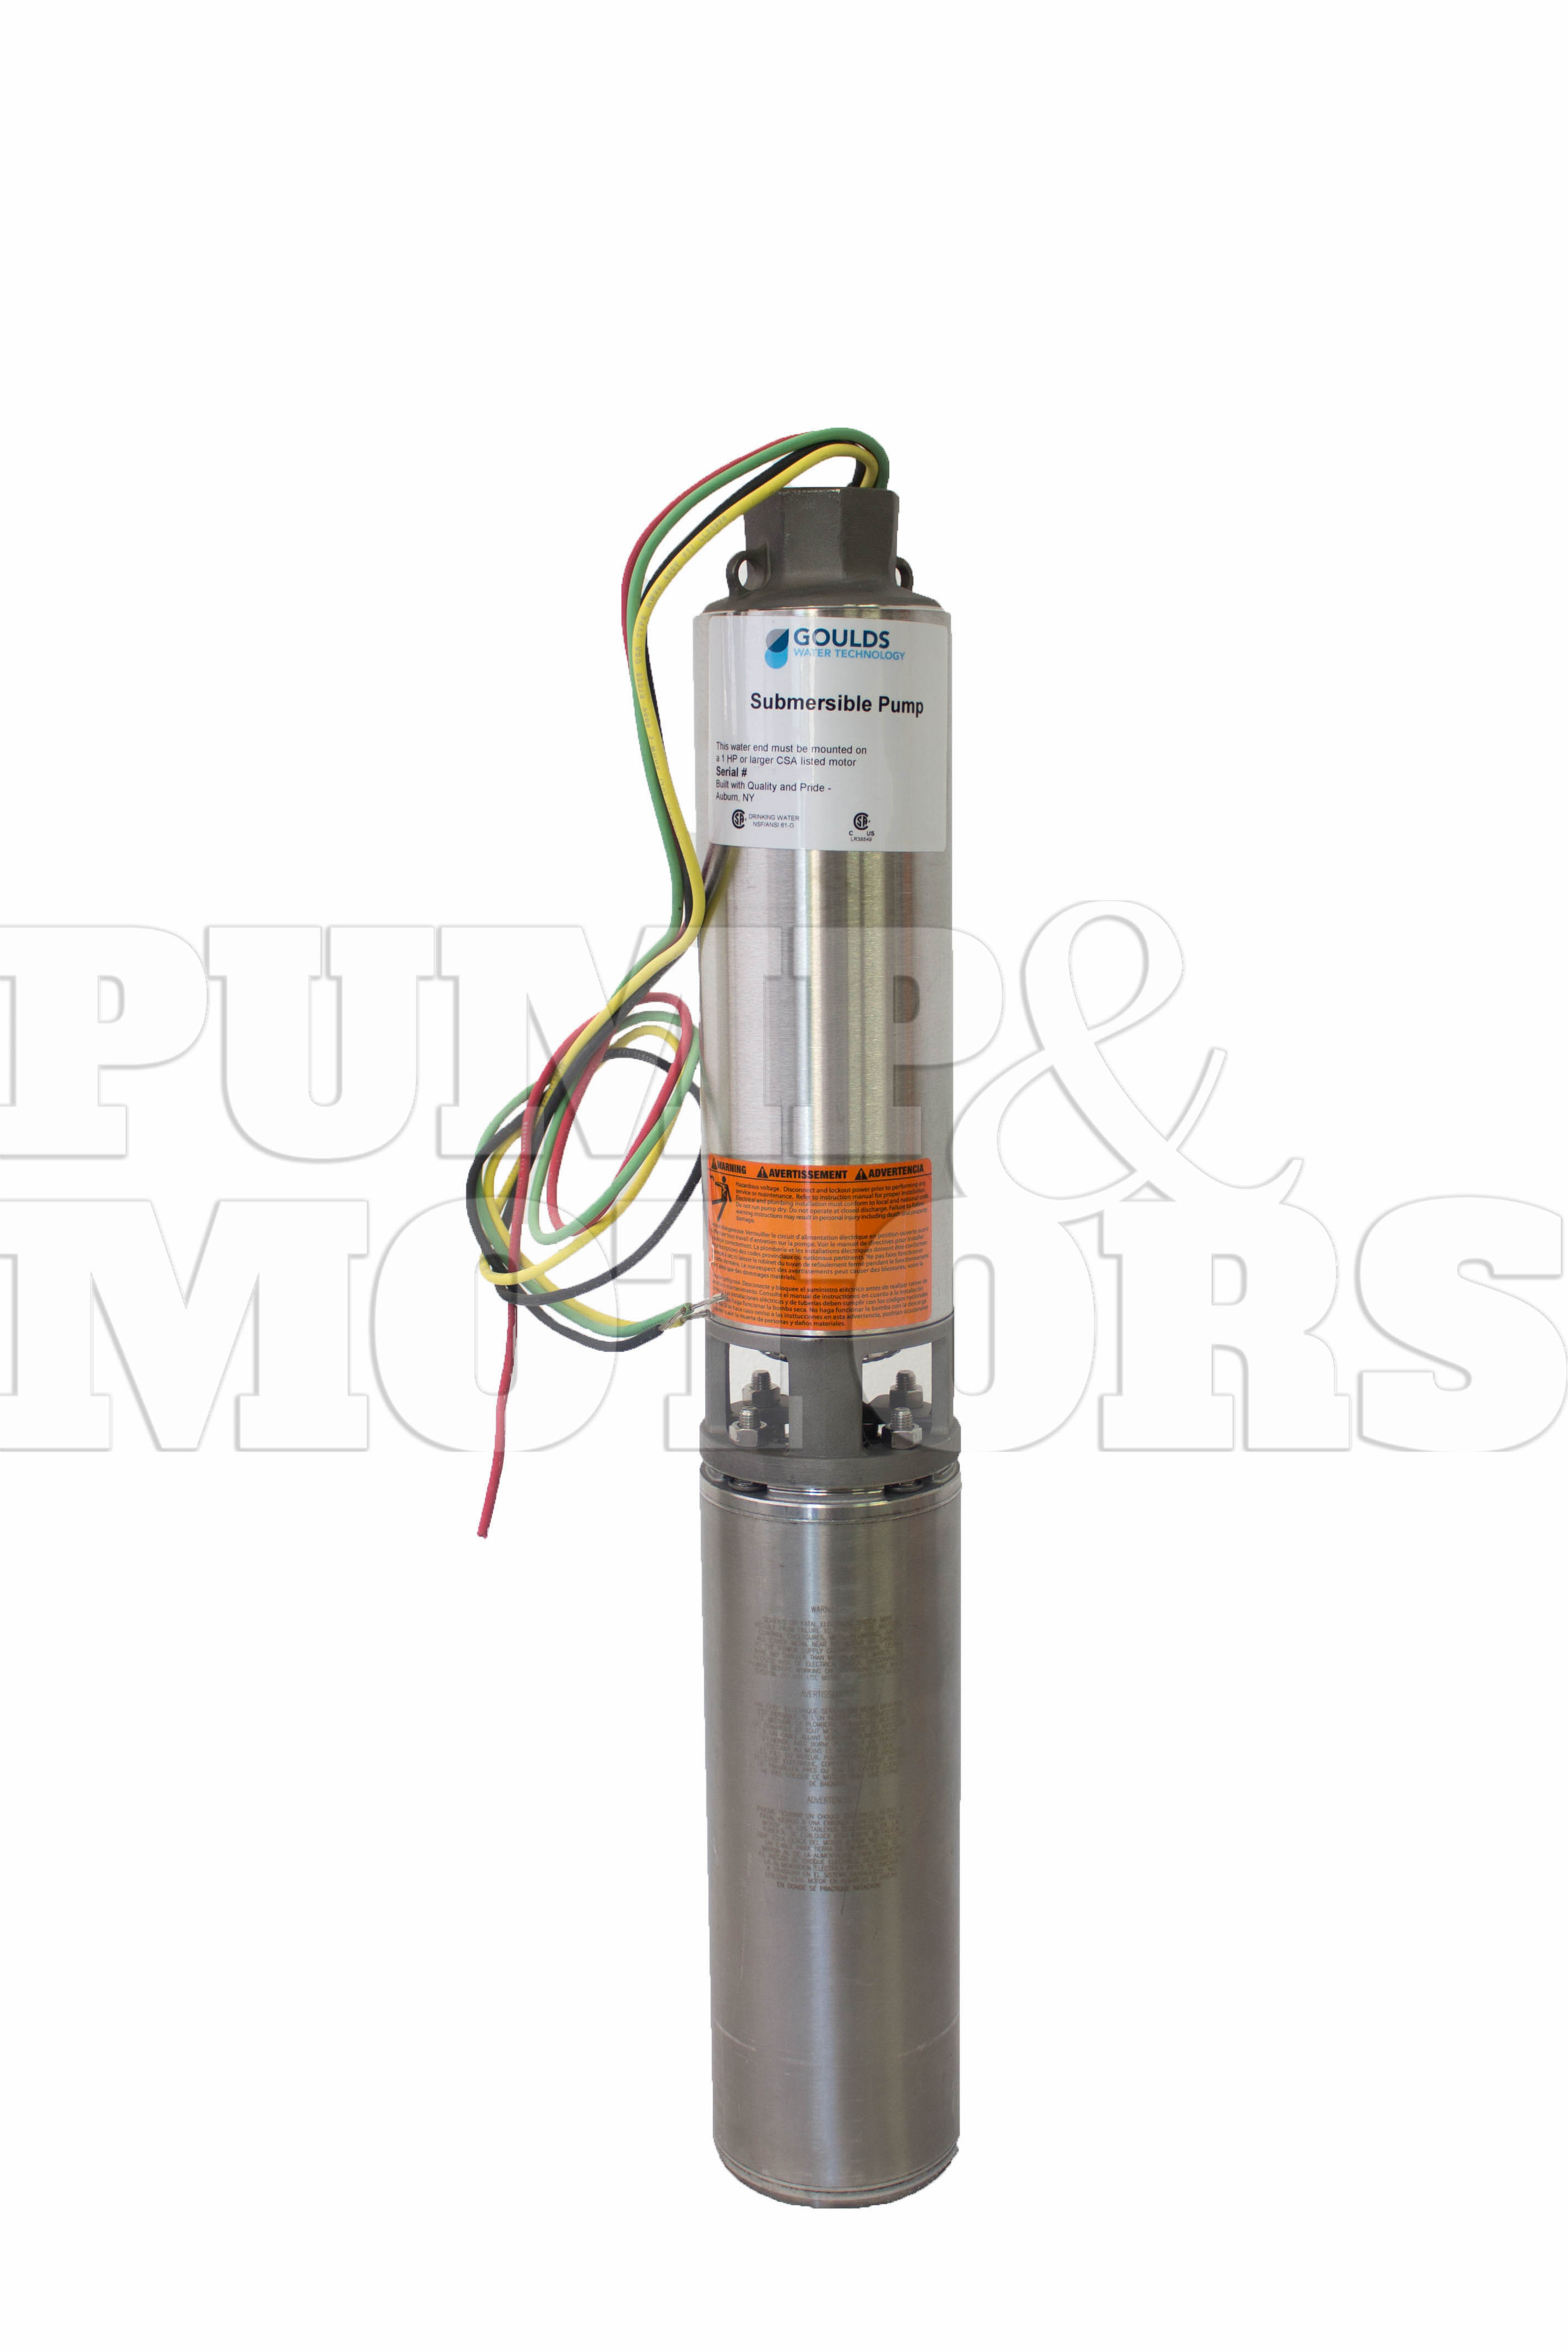 Goulds 25GS20412CL 2HP 230V 4" Submersible Water Well Pump 25GPM